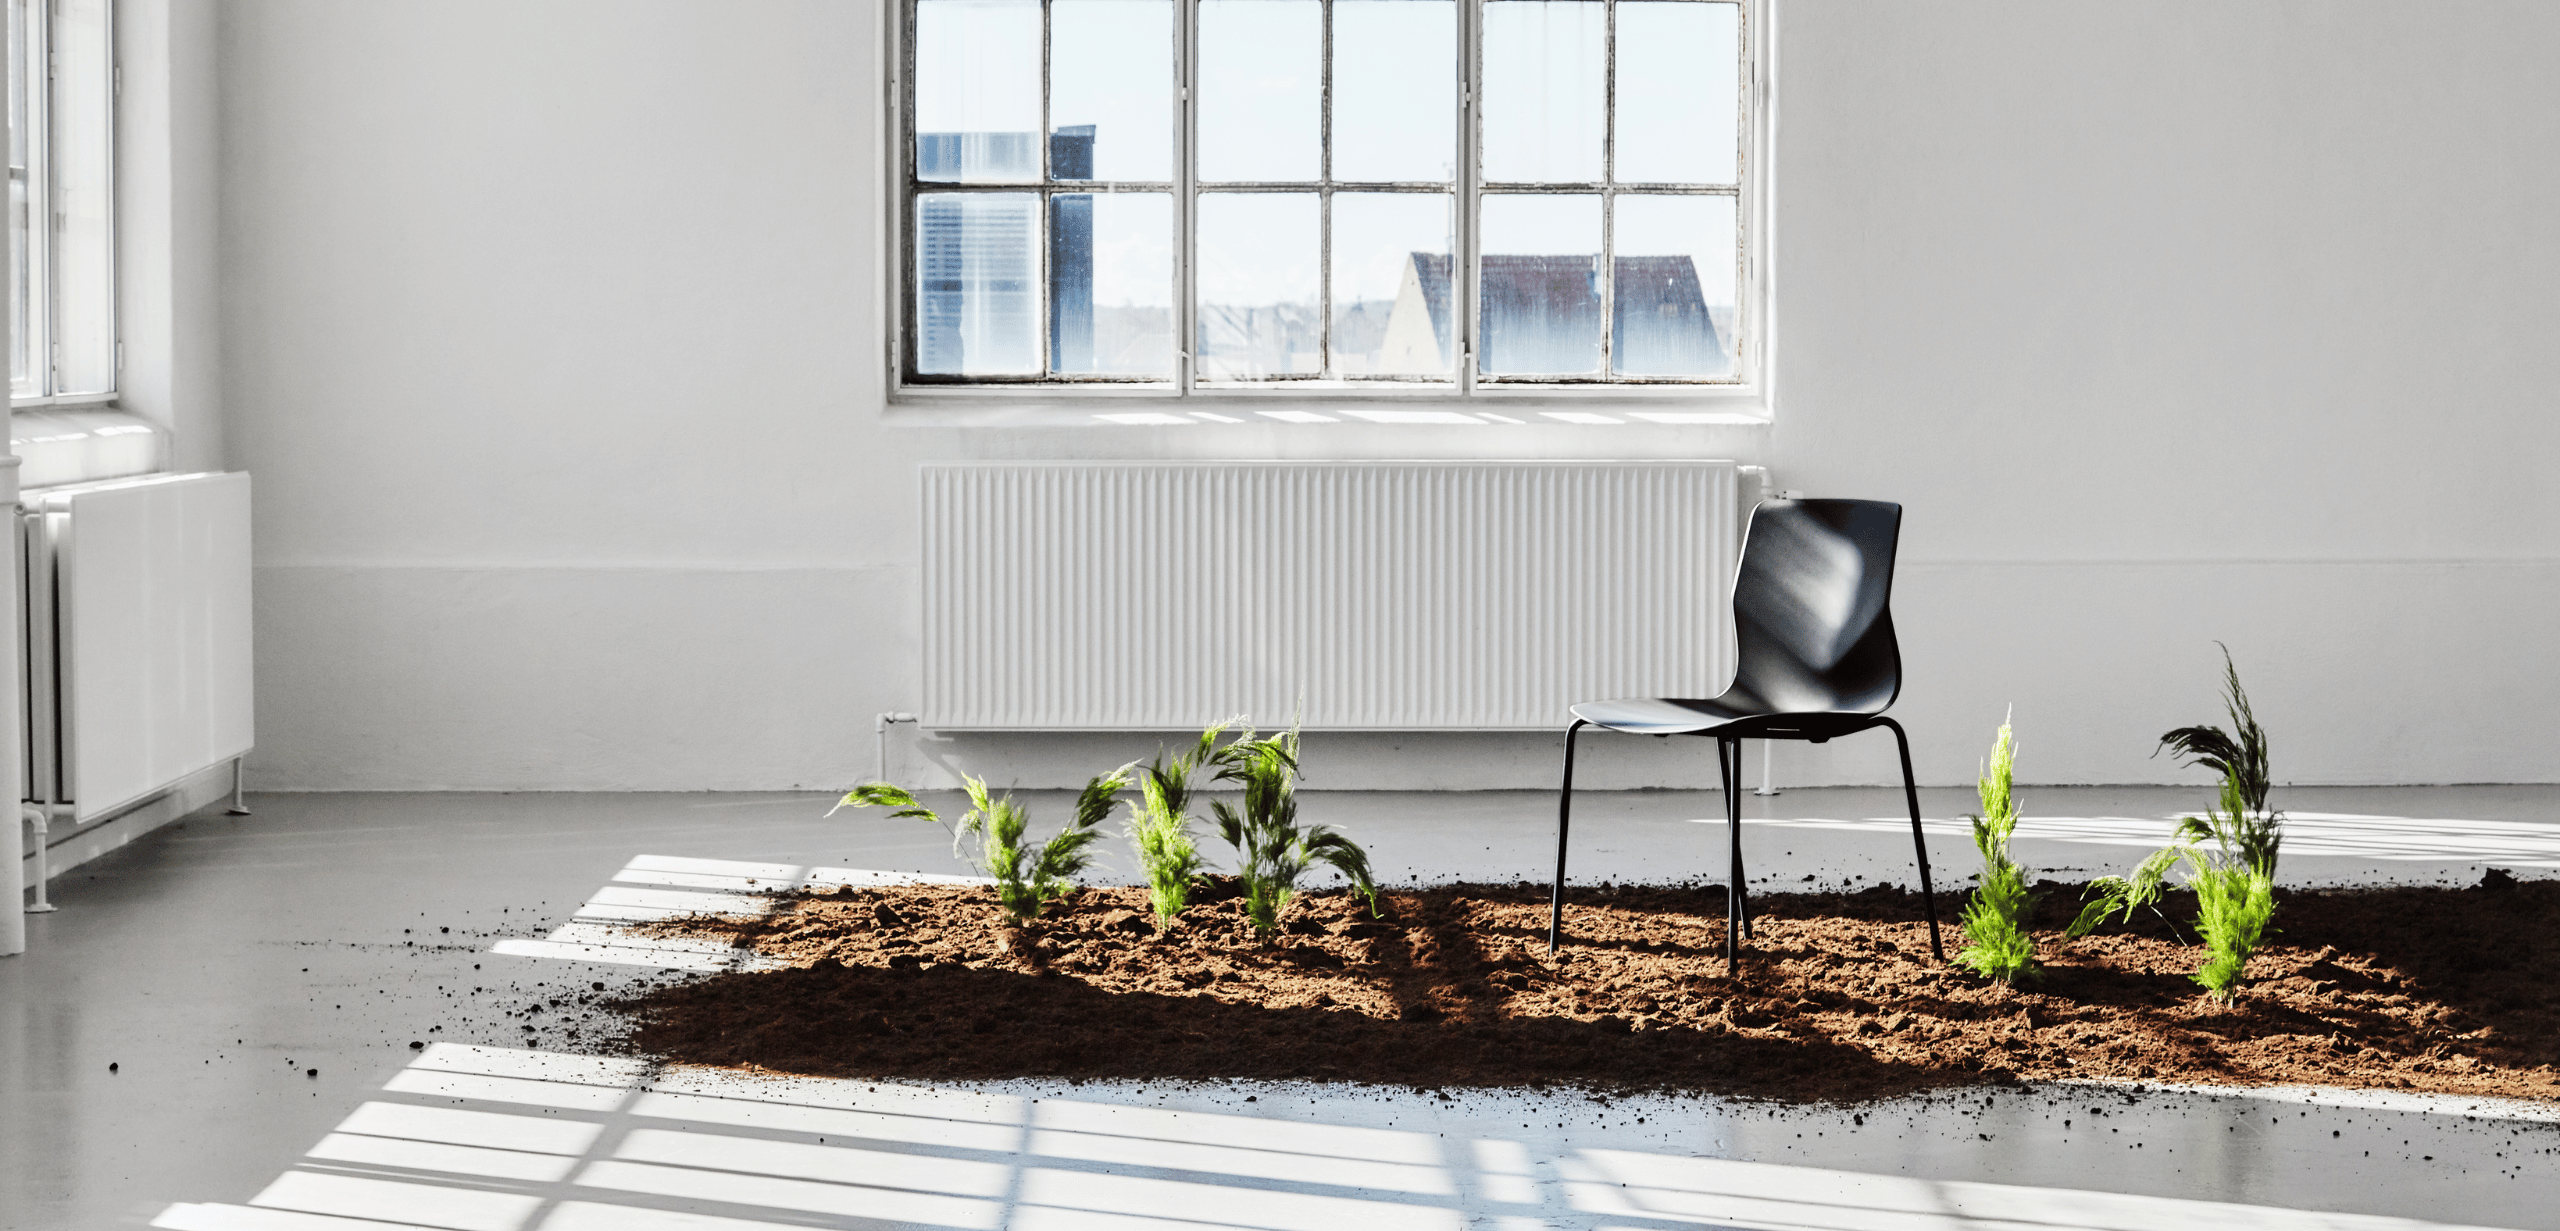 A chair in the dirt next to a window.